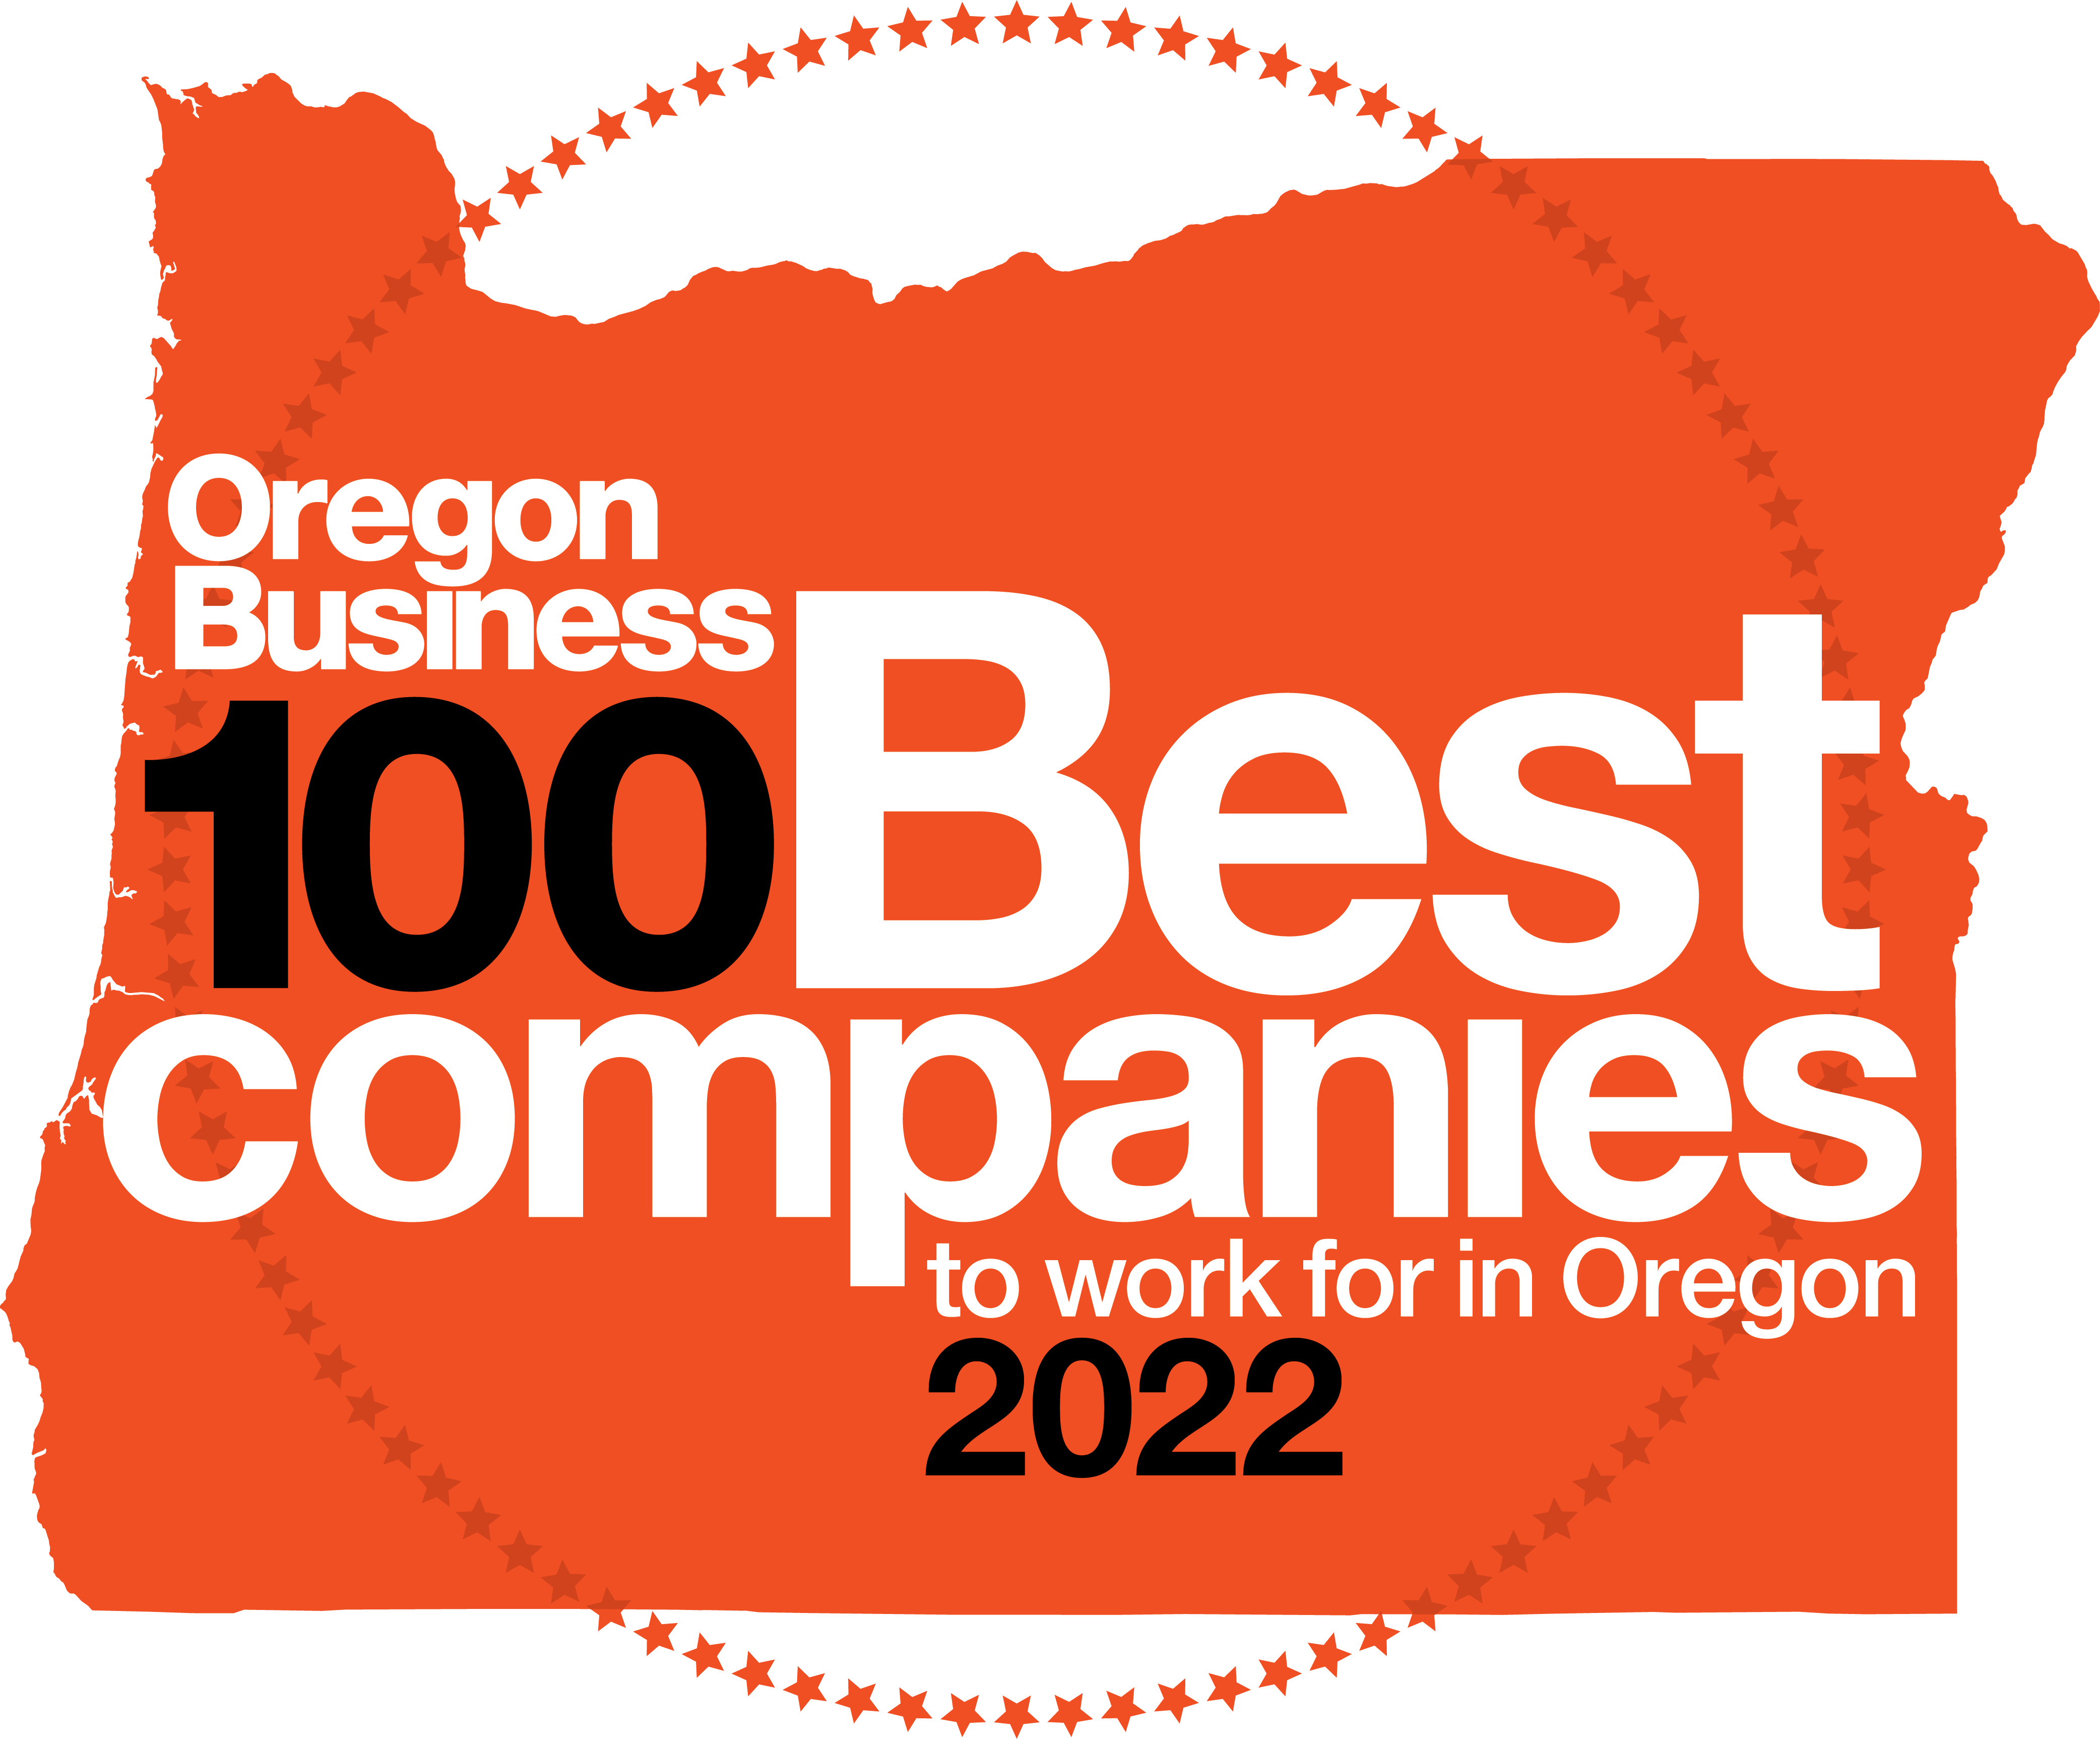 Markowitz Herbold Named a 2022 Best Company to Work For in Oregon